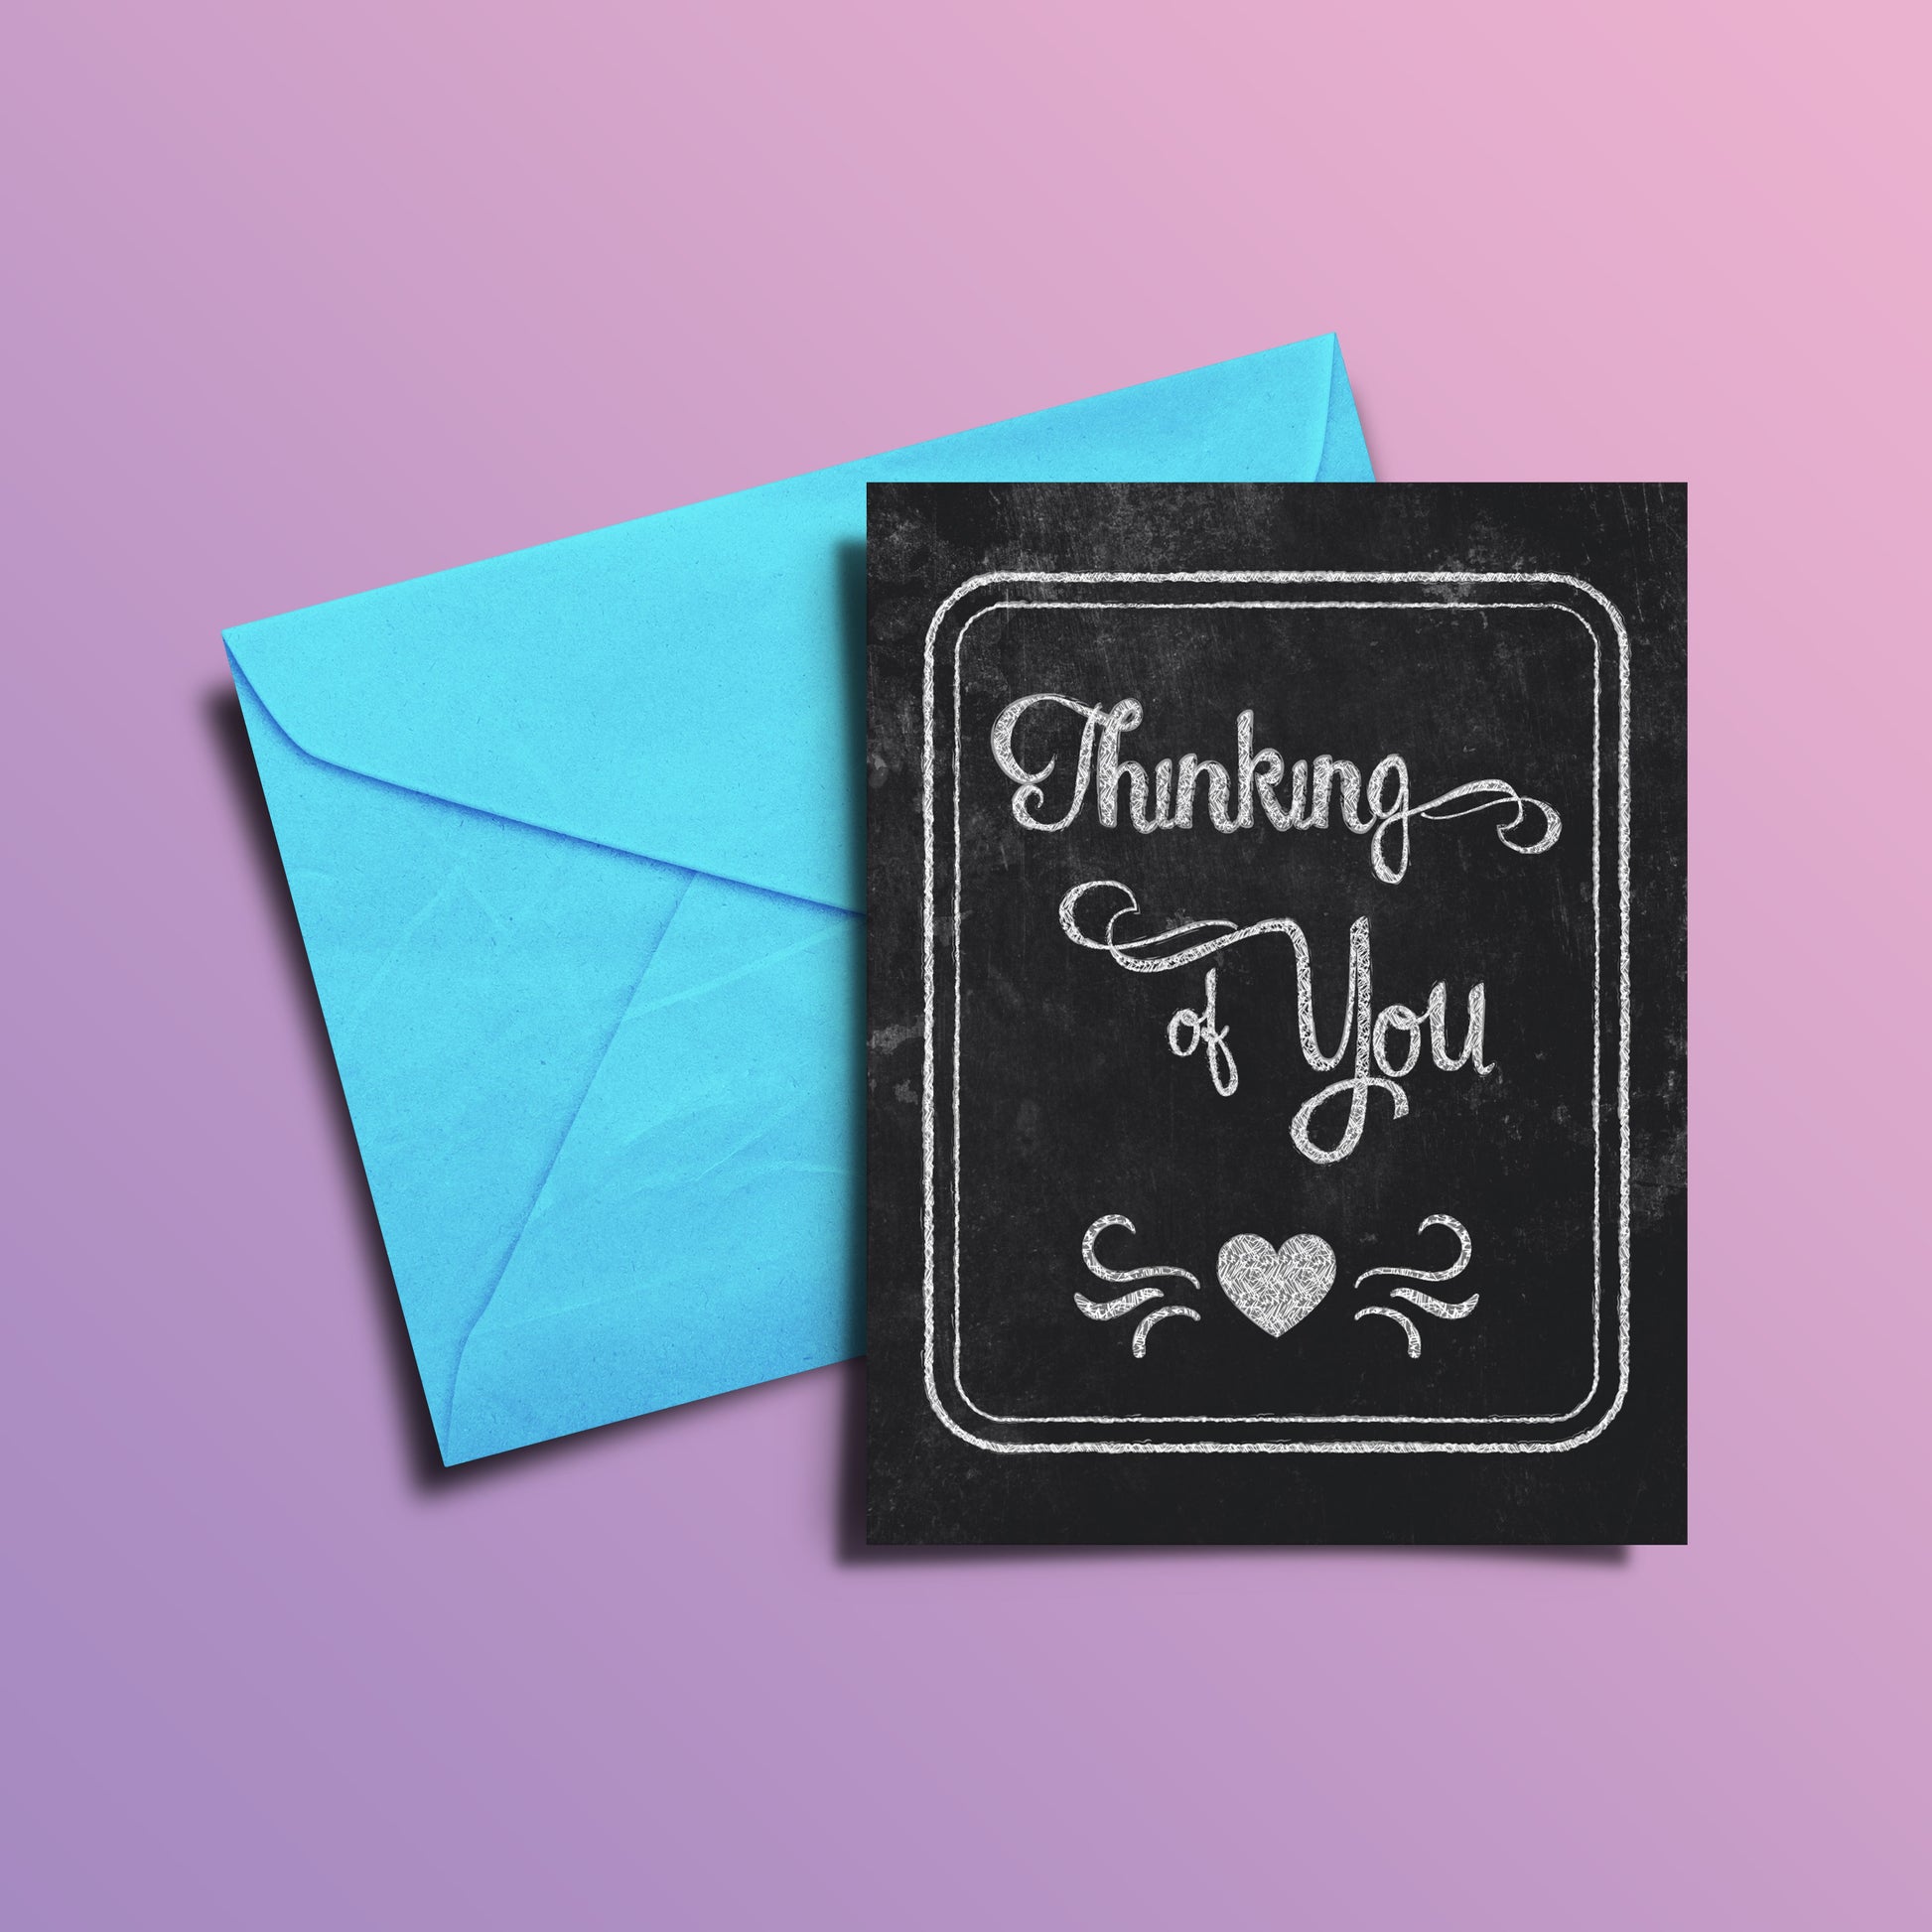 Chalk-board style card, "Thinking of you" in chalk on black, over blue envelope with purple background.